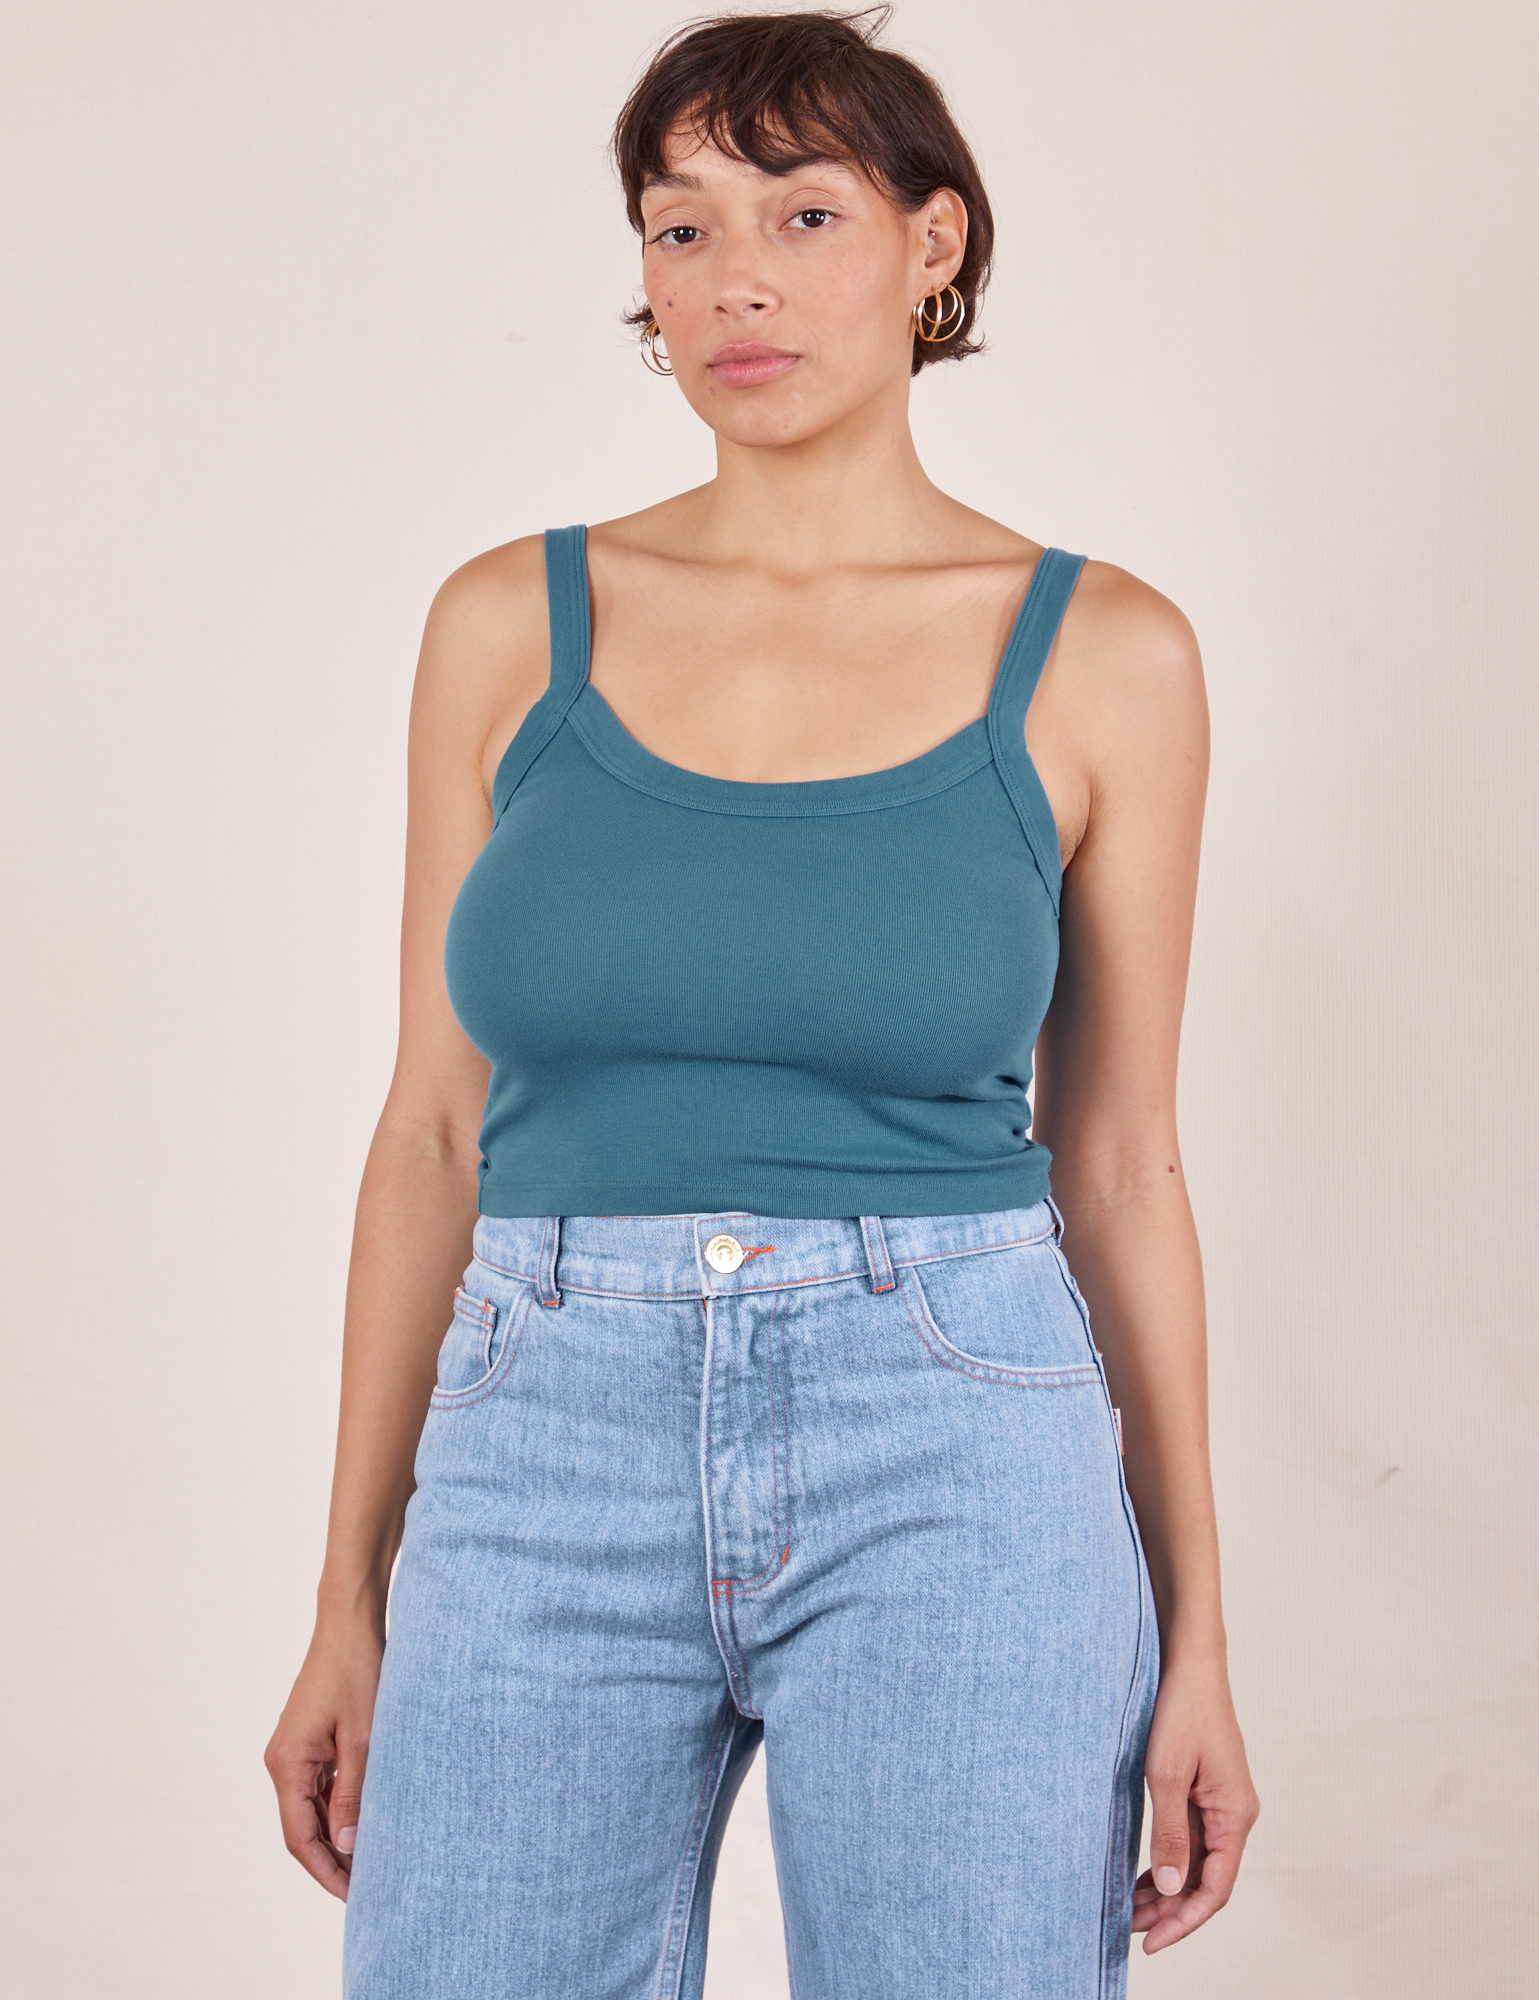 Tiara is 5&#39;4&quot; and wearing XS Cropped Cami in Marine Blue paired with light wash Sailor Jeans